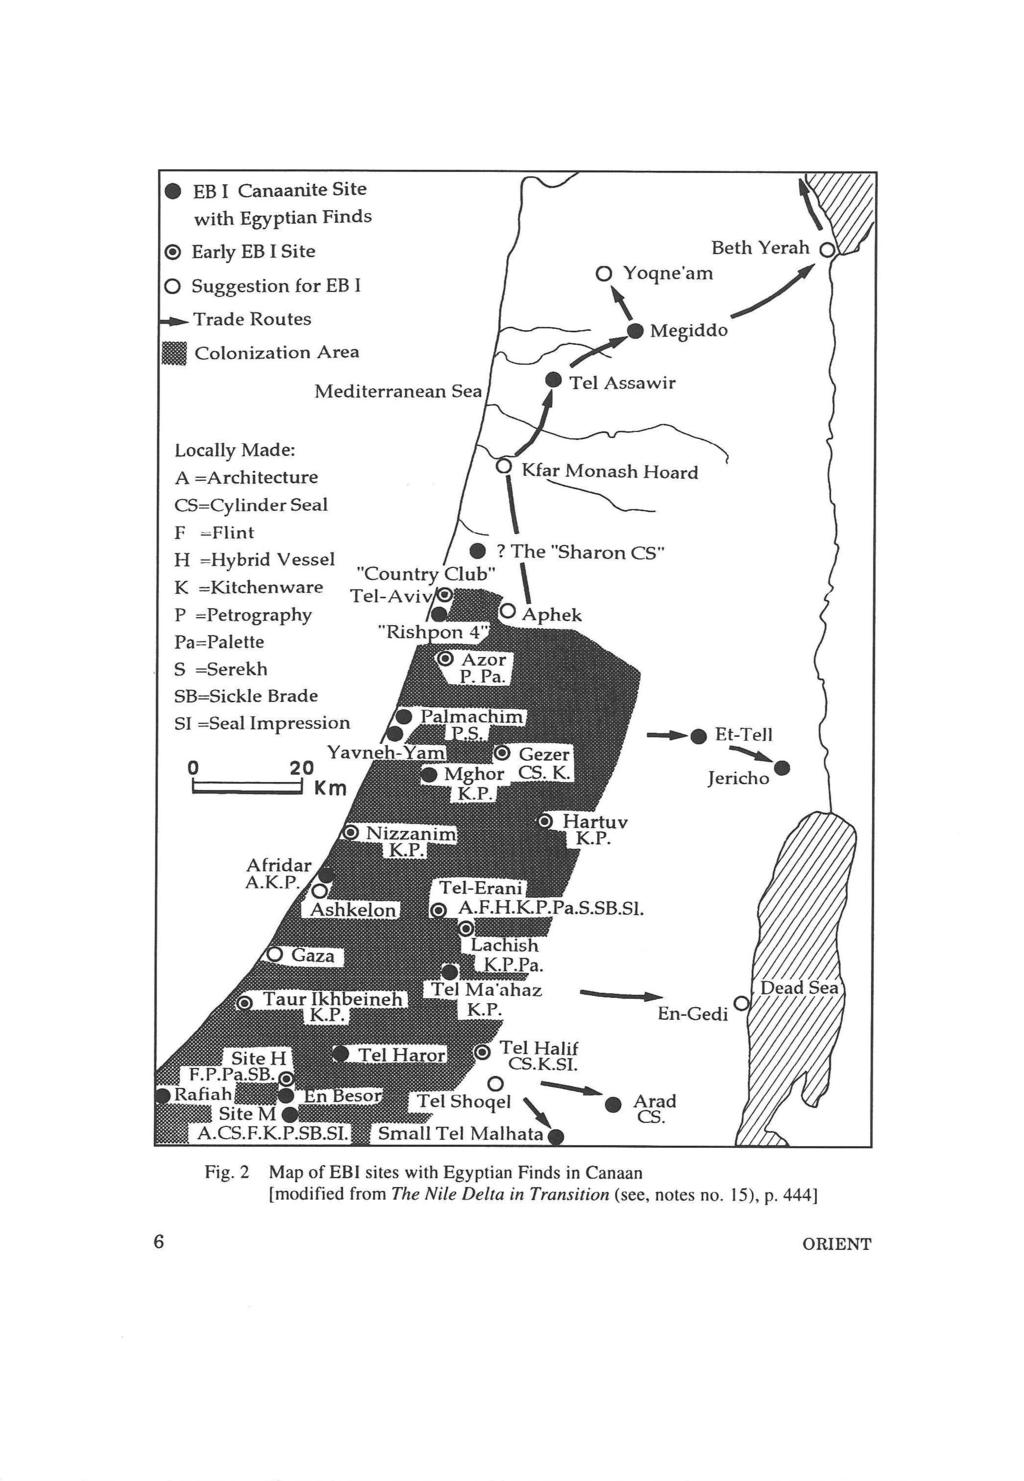 Fig. 2 Map of EBI sites with Egyptian Finds in Canaan [modified